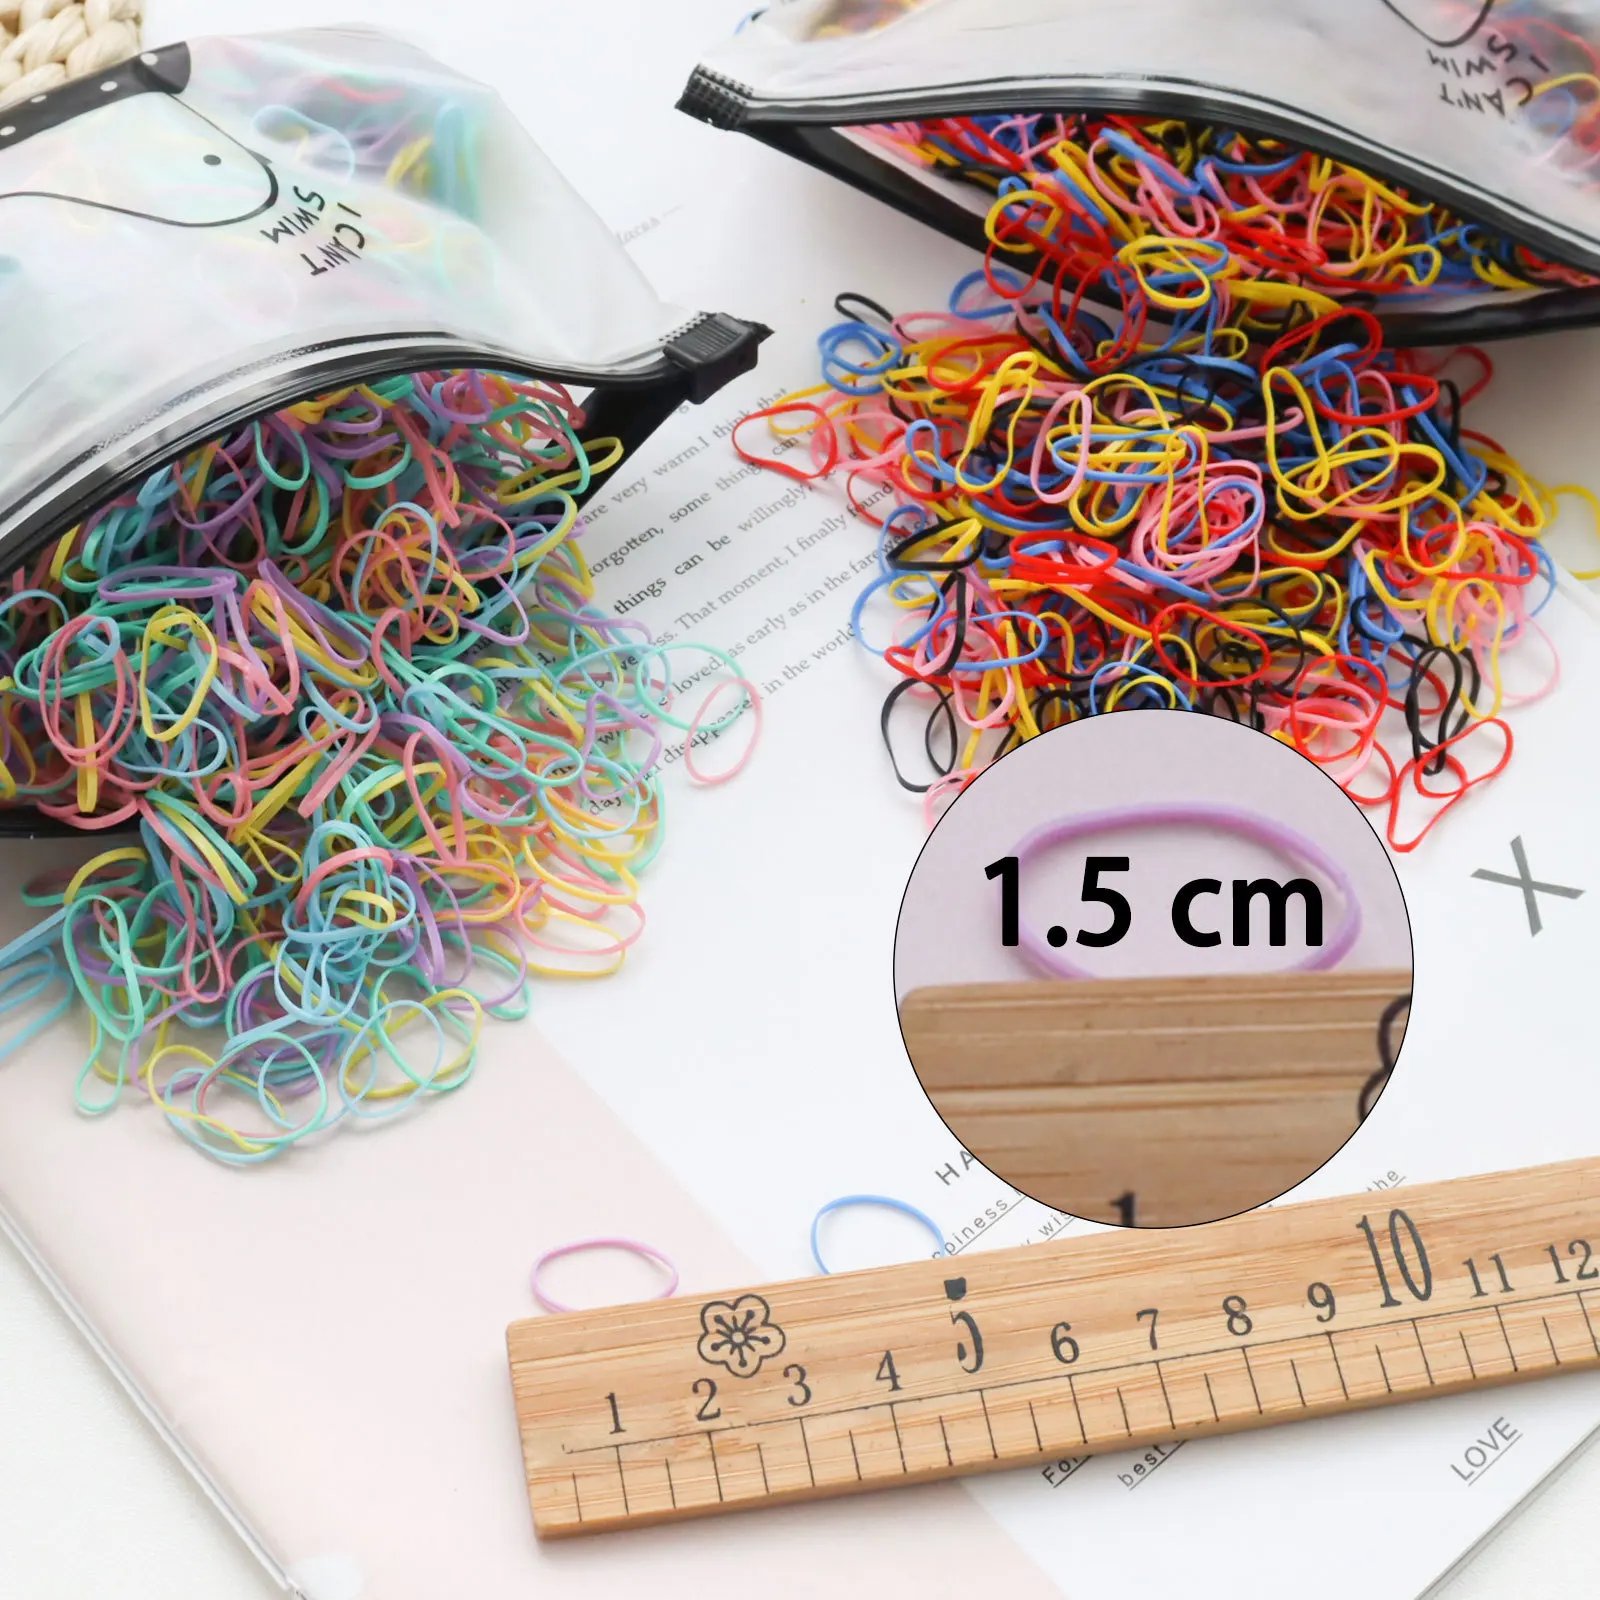 1000PCS Elastic Hair Bands Ponytail Hairband Colourful Rubber Band Scrunchies Disposable Baby Hair Accessories Cute Hairs Ties baby accessories coloring pages	 Baby Accessories